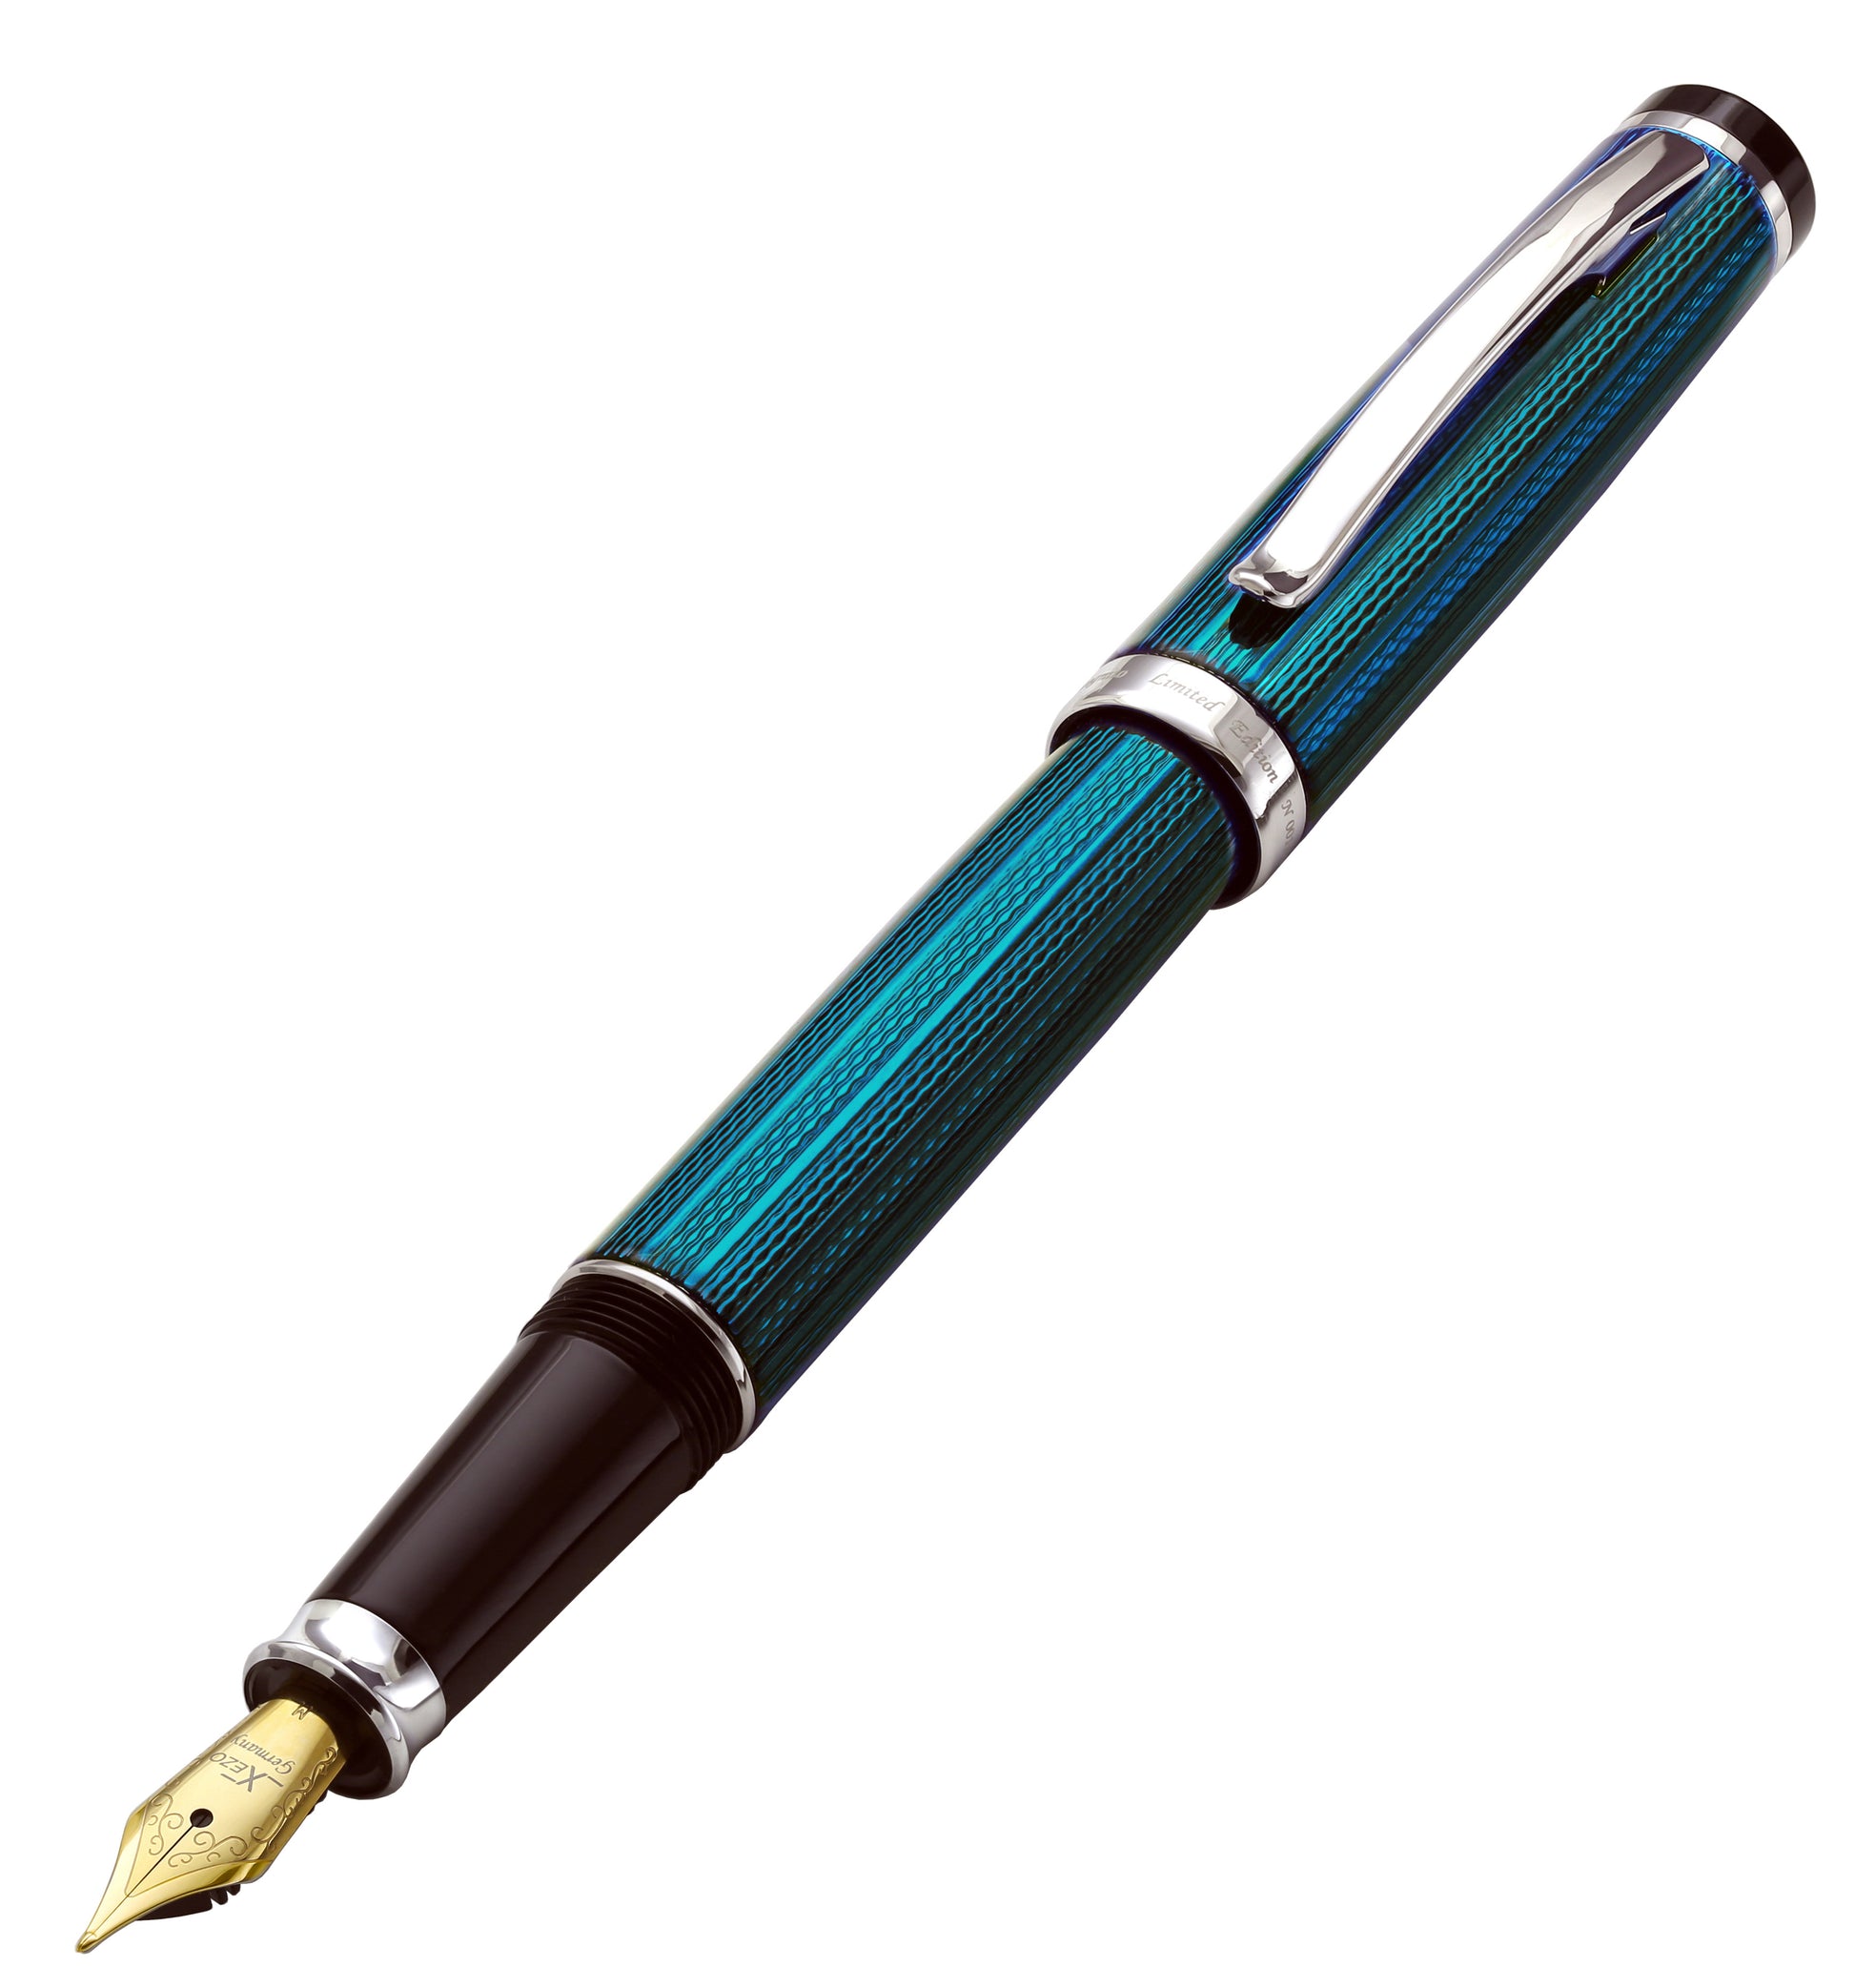 Xezo - Angled 3D view of the front of the Incognito Blue FM fountain pen